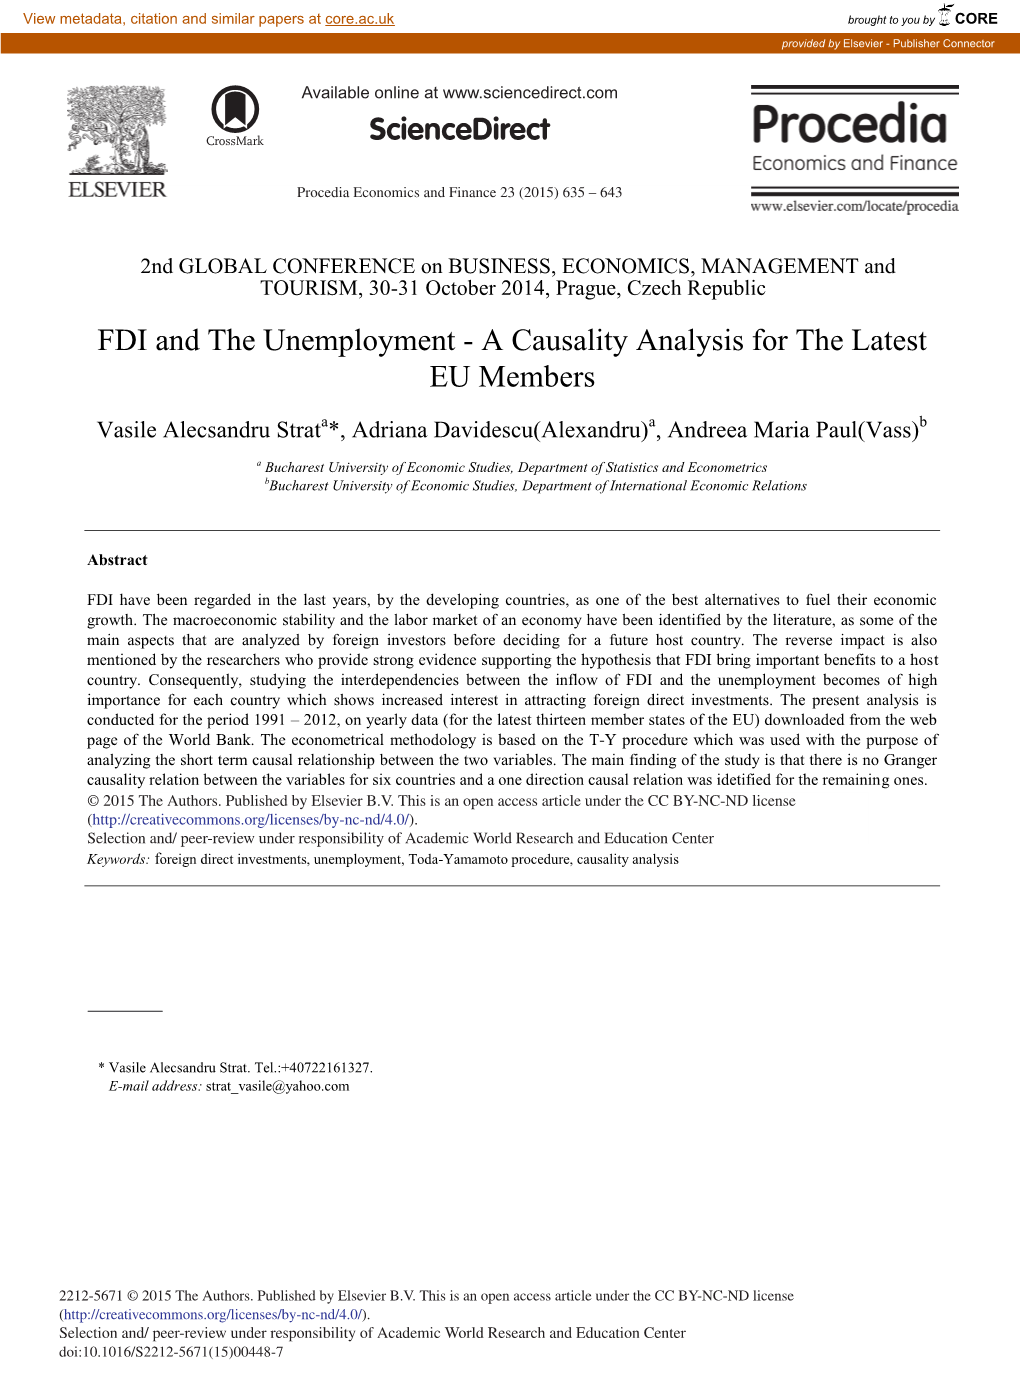 FDI and the Unemployment - a Causality Analysis for the Latest EU Members